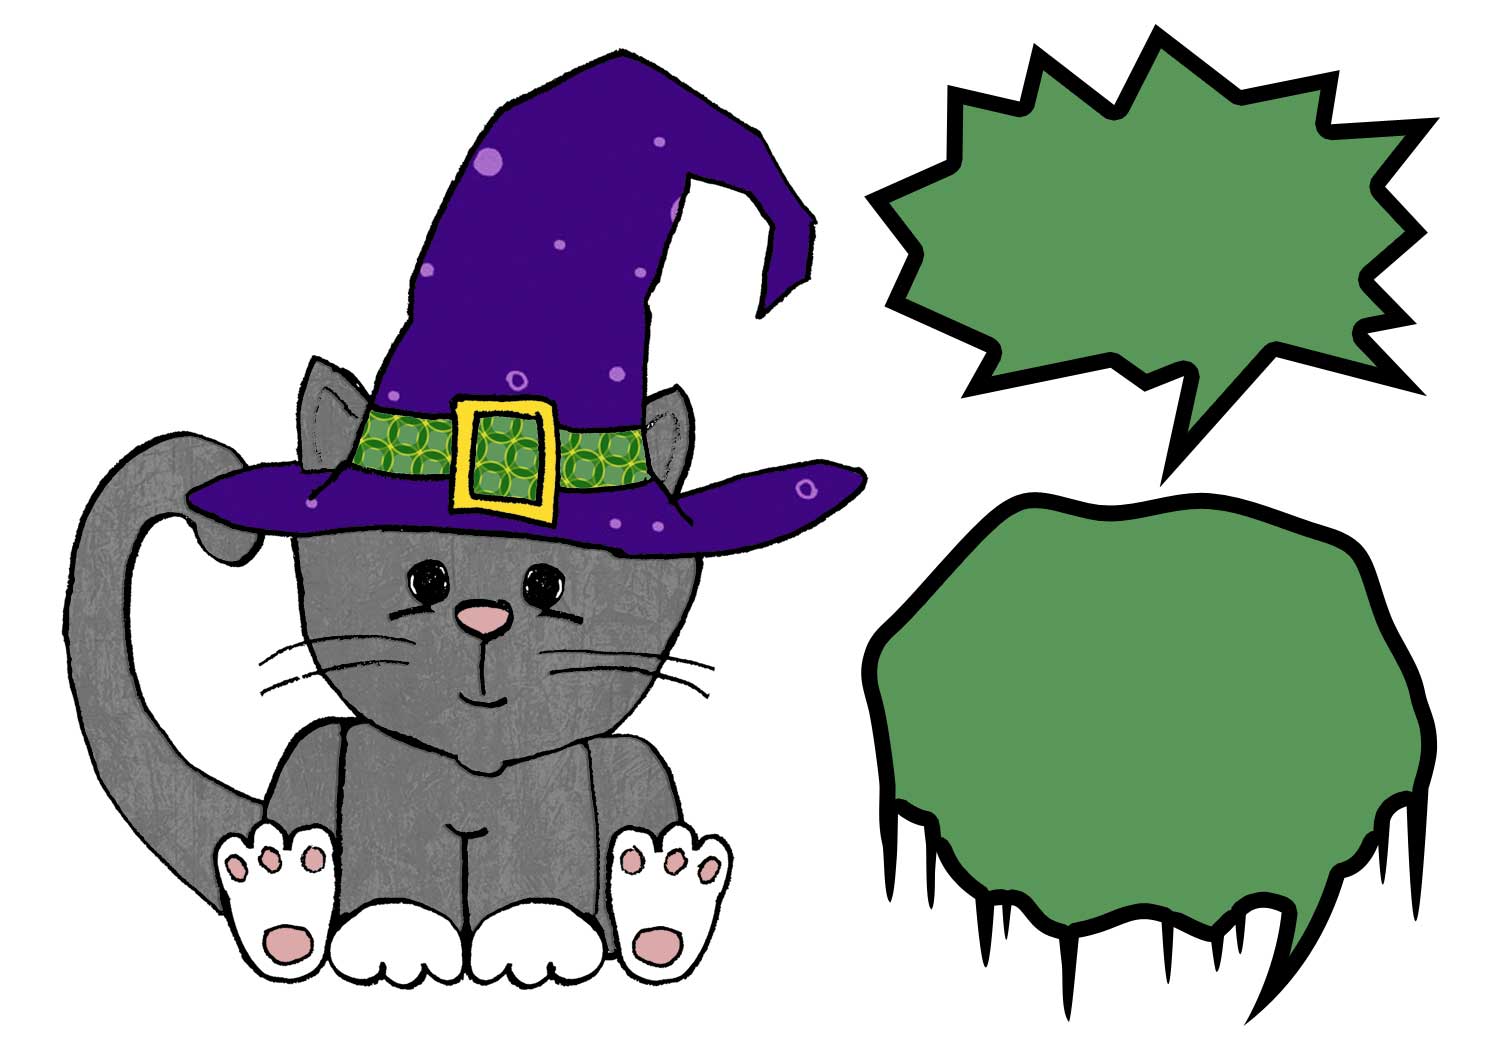 eri doodle designs and creations: Meow says the Halloween kitty